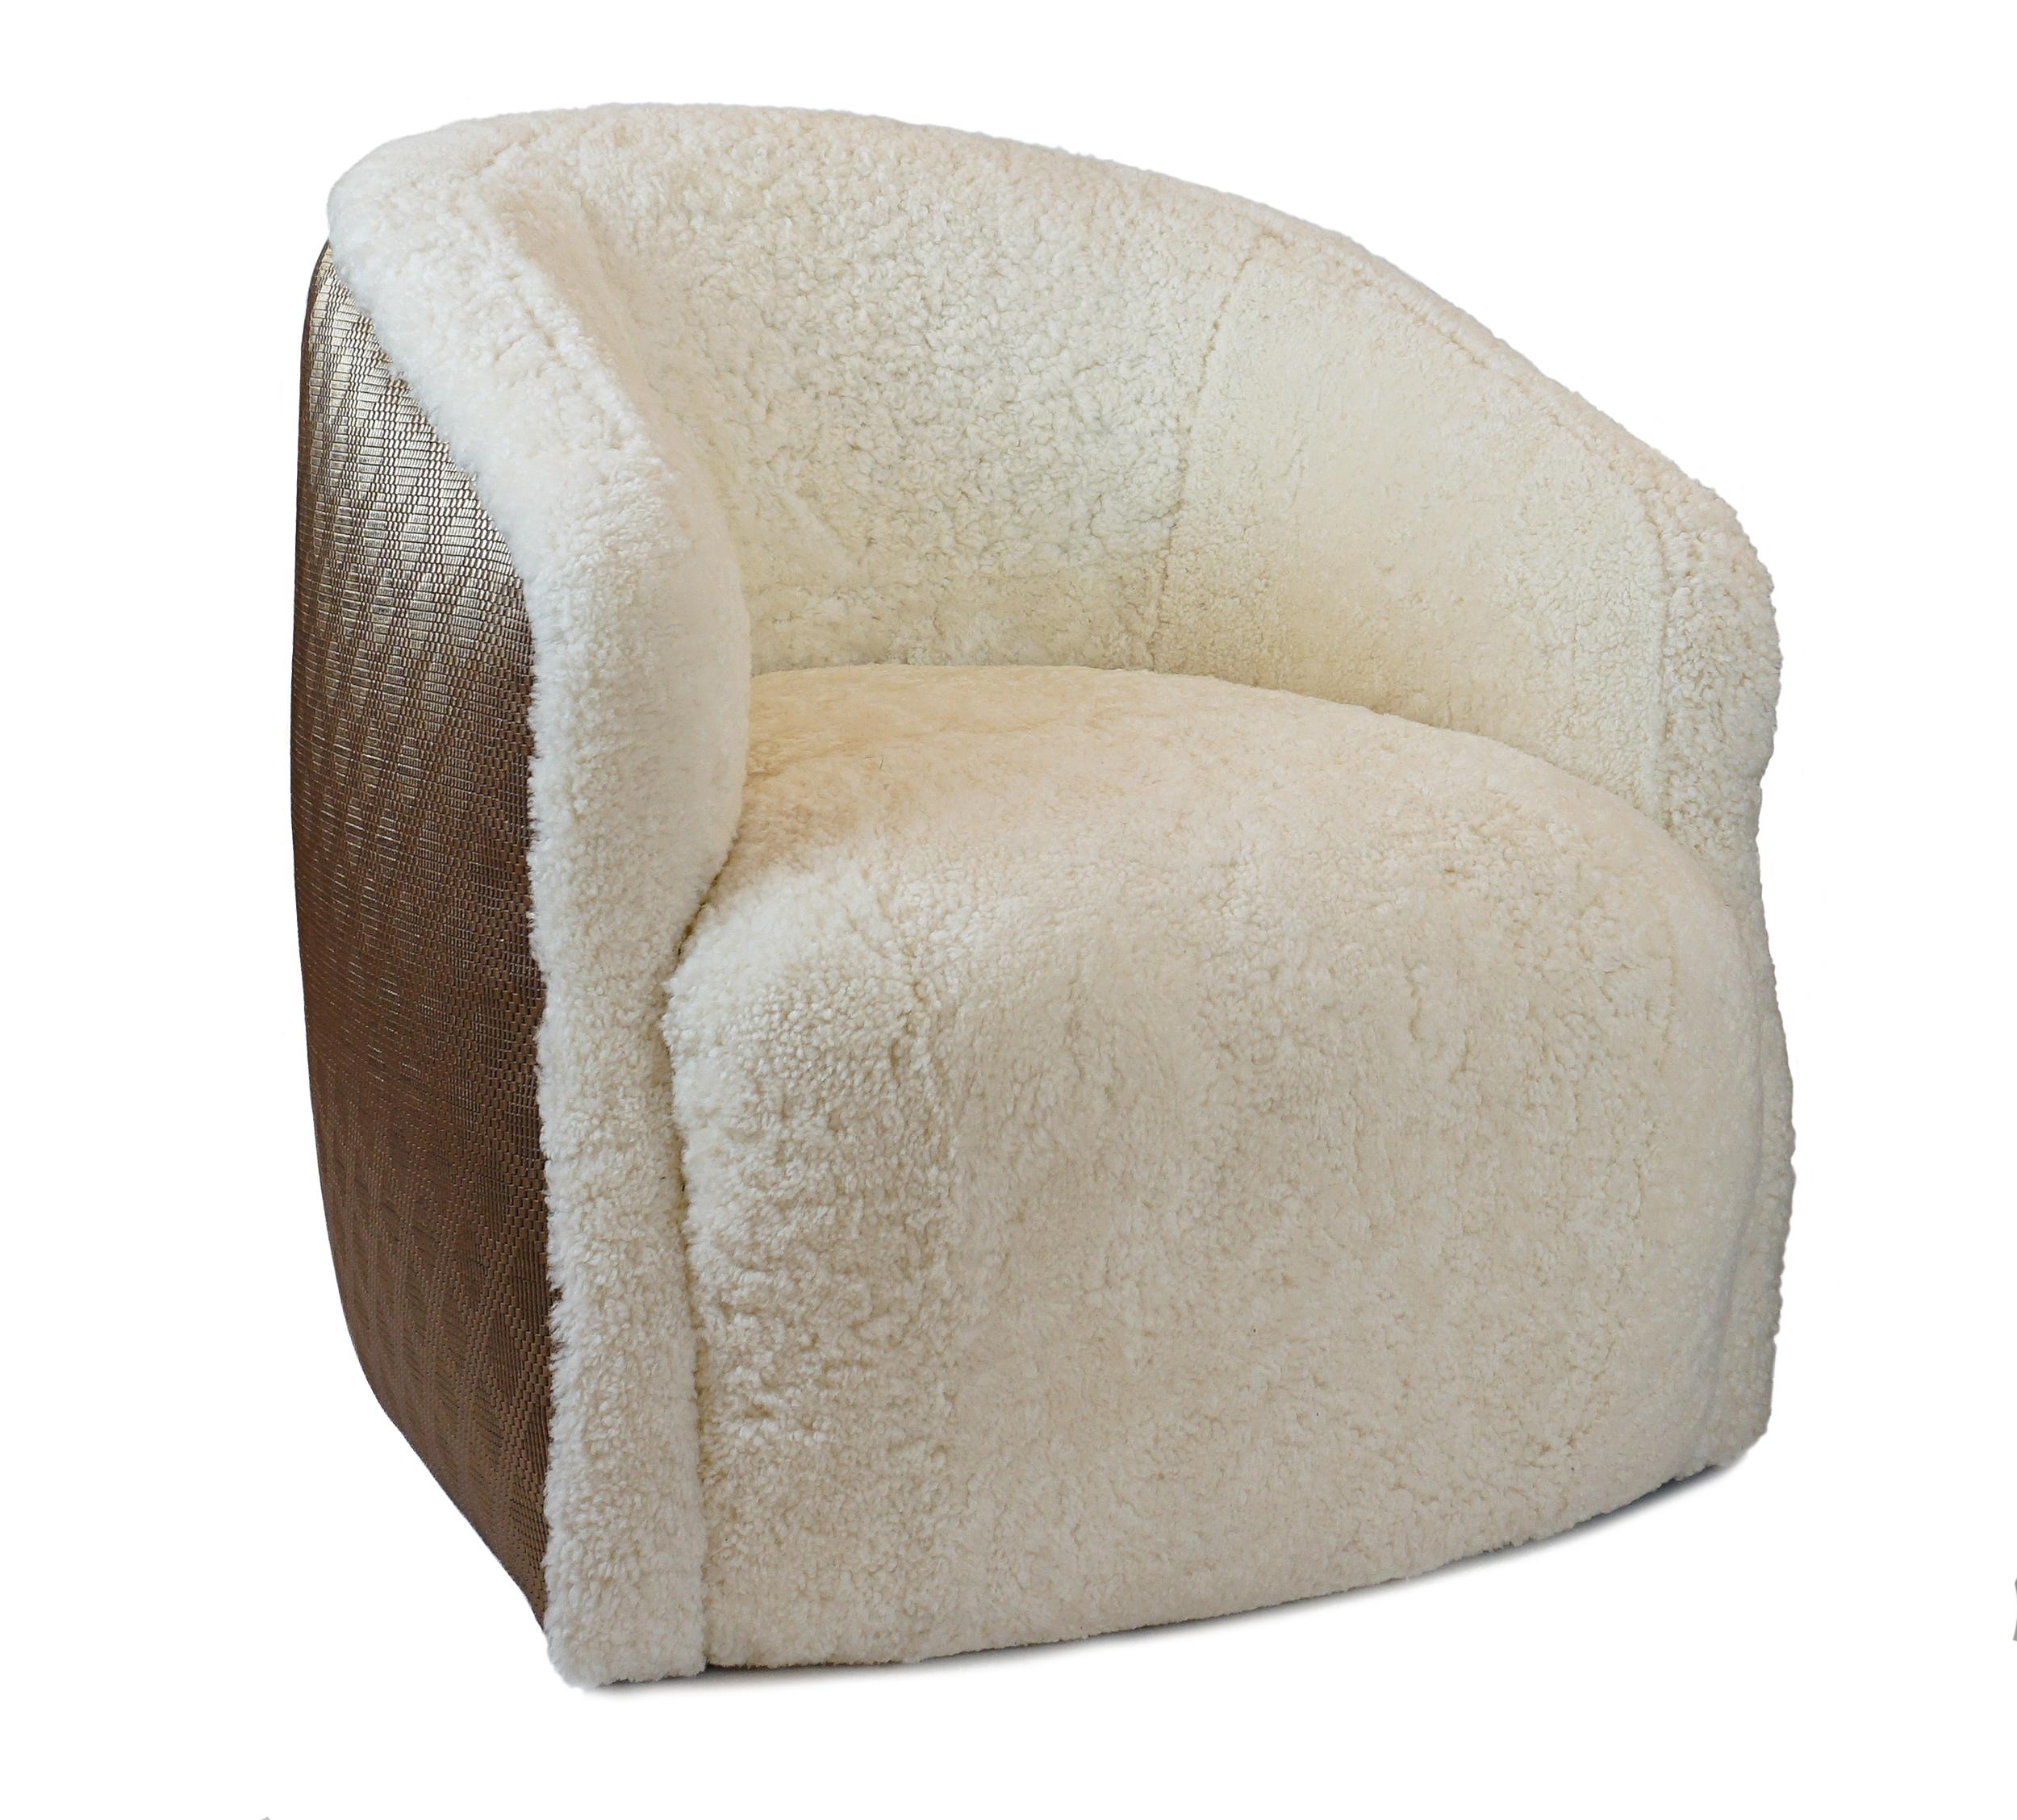 Slope arm bucket swivel chair with real shearling and contrast vinyl on outside back. Tight, firm, responsive seat and upholstery. Swivels 360 degrees. 

Measurements:
Overall: 33”W x 34”D x 31”H
Inside: 19”W x 22”D x 14”H
Seat height: 18